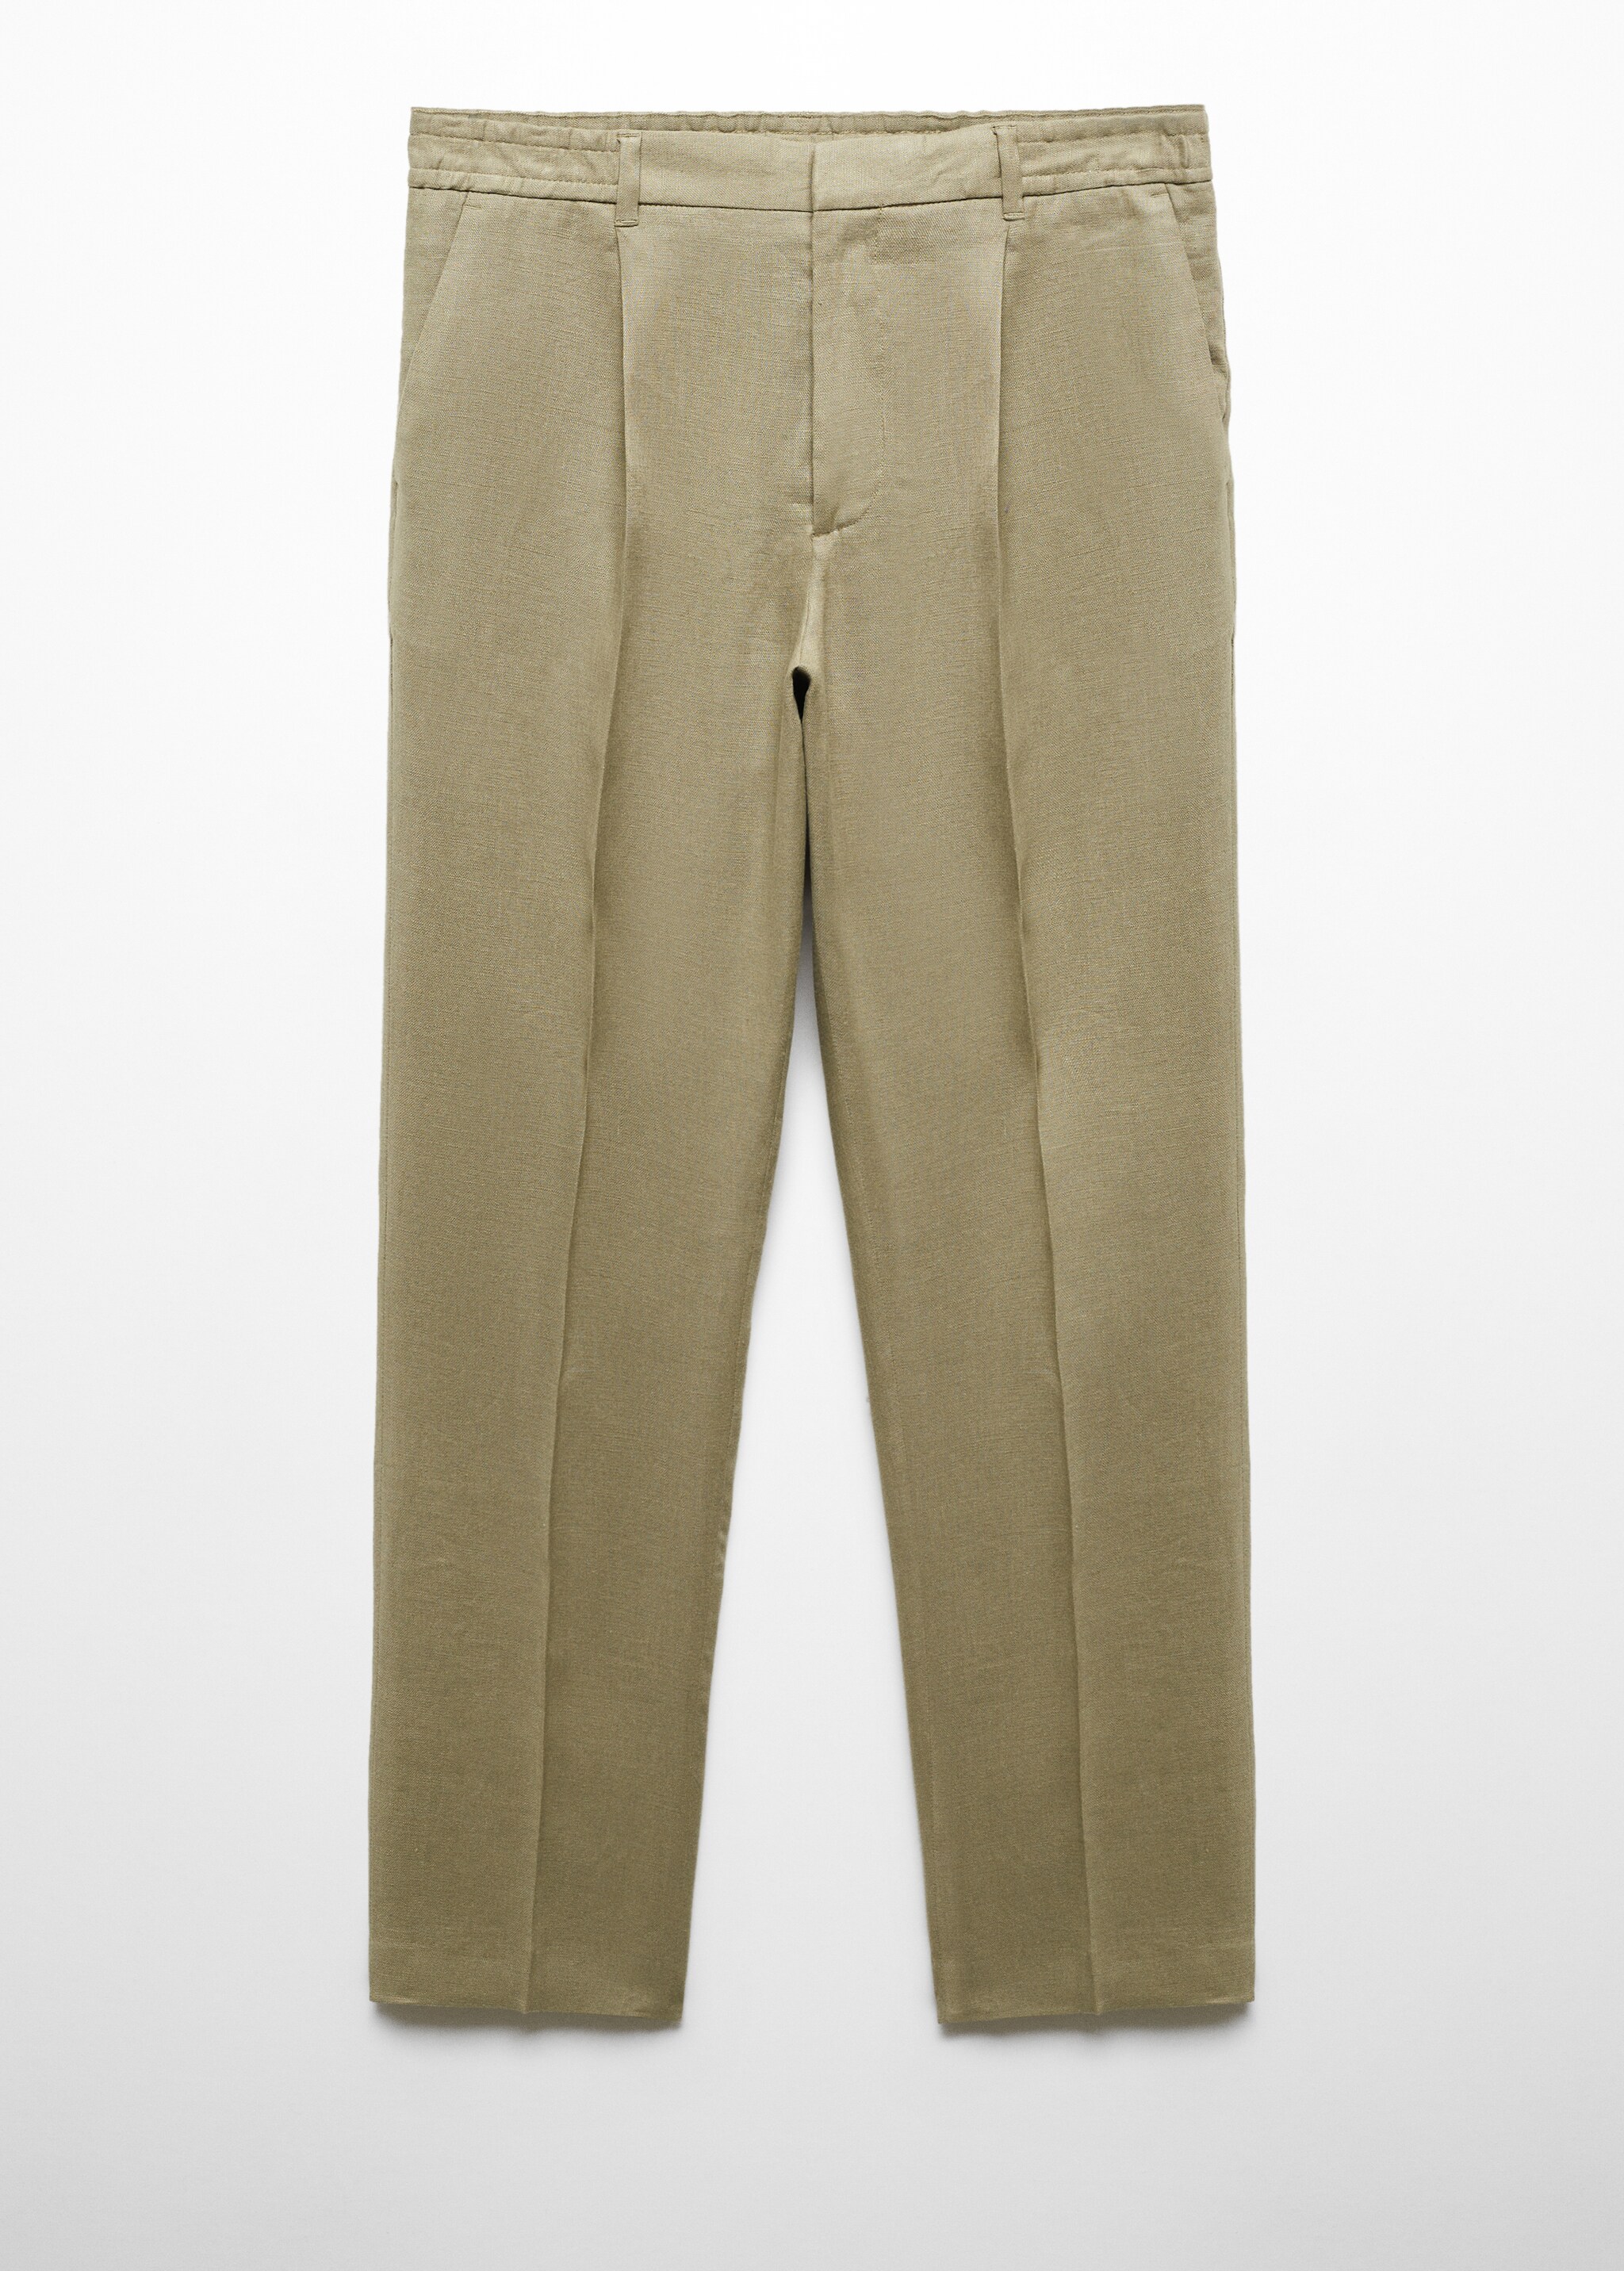 100% linen regular-fit trousers - Article without model